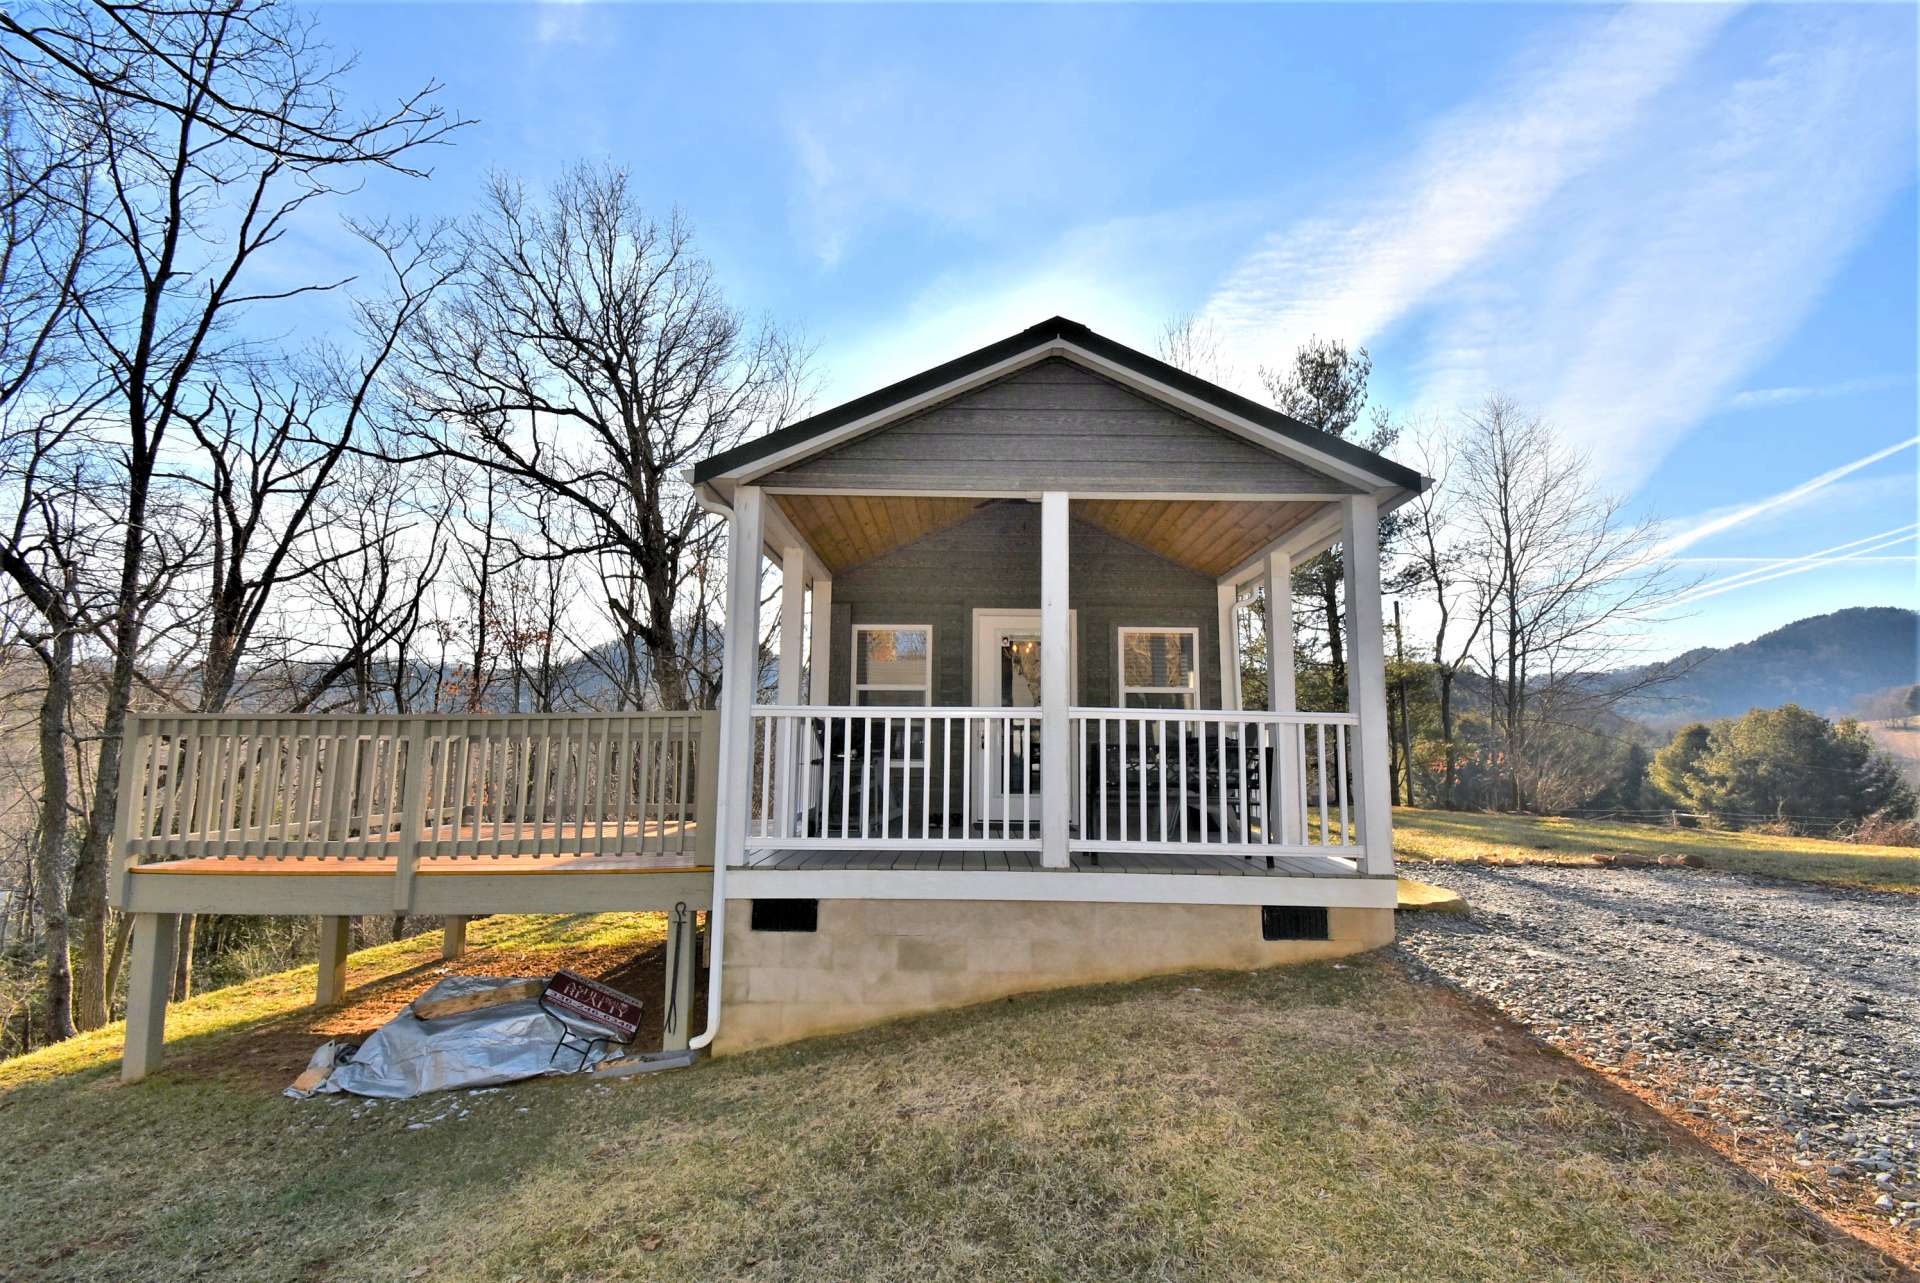 https://www.ashecountyrealestate.com/uploads/listings/images/nc-mountain-tiny-home-retreat-sparta/l105-alleghany-county-nc-tiny-home.JPG